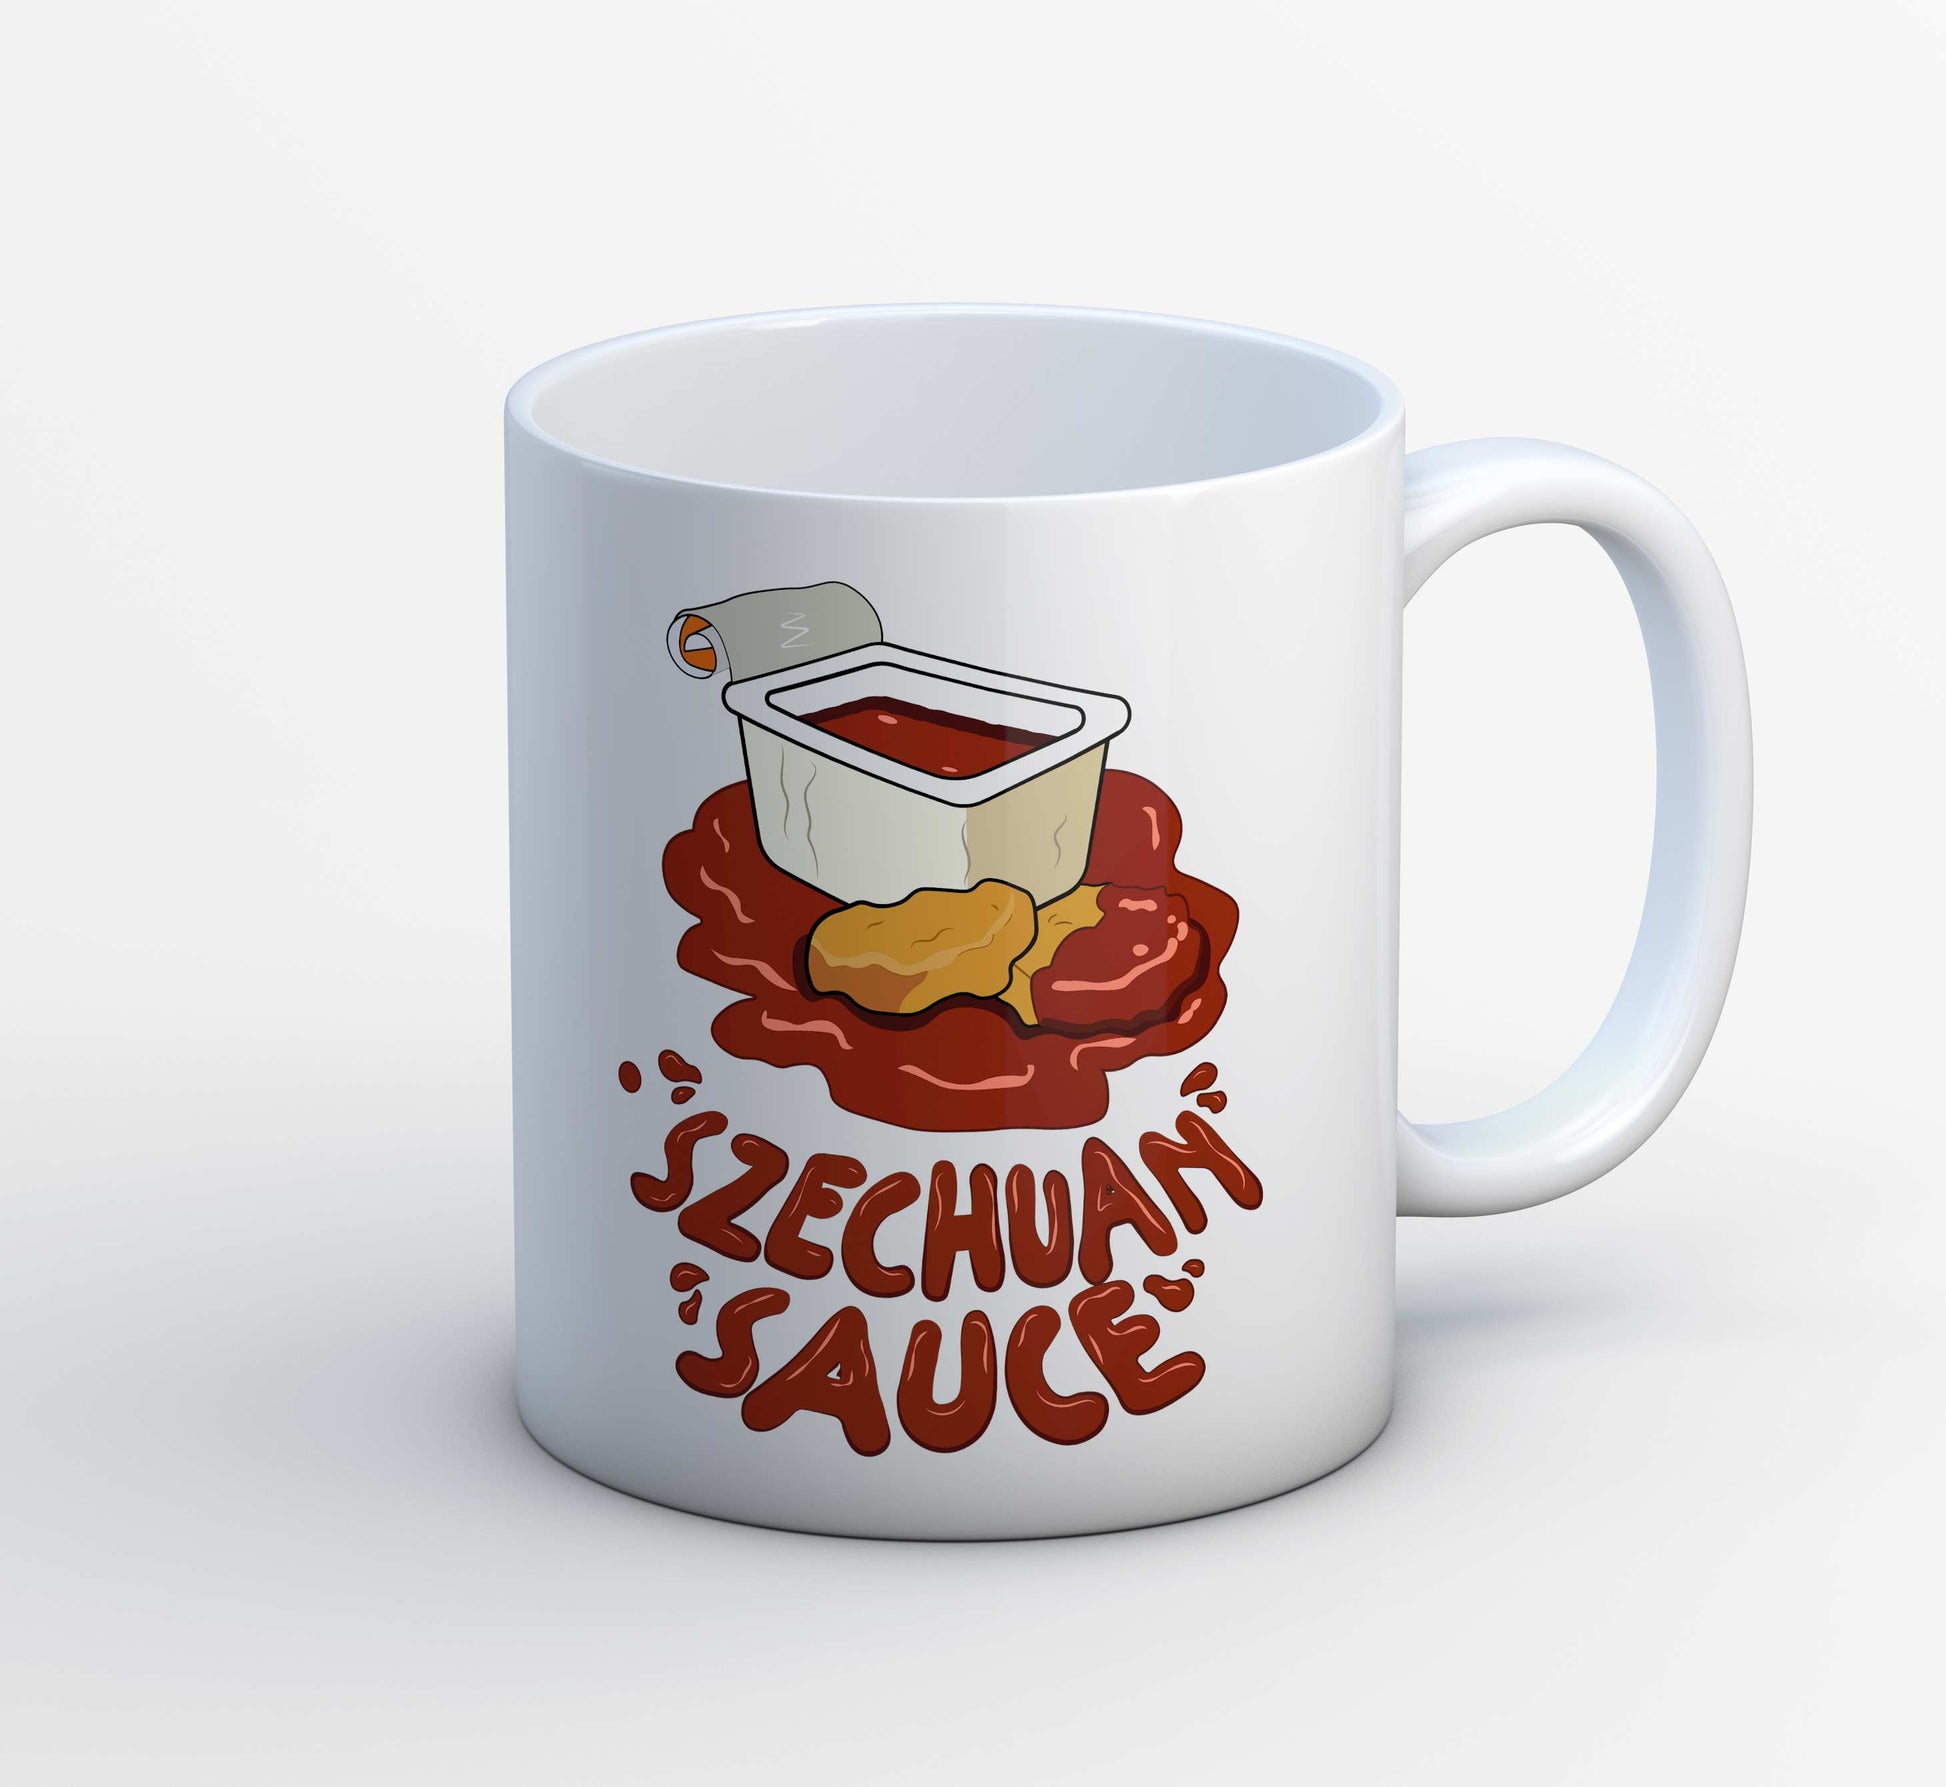 rick and morty szechuan sauce mug coffee ceramic buy online india the banyan tee tbt men women girls boys unisex  rick and morty online summer beth mr meeseeks jerry quote vector art clothing accessories merchandise